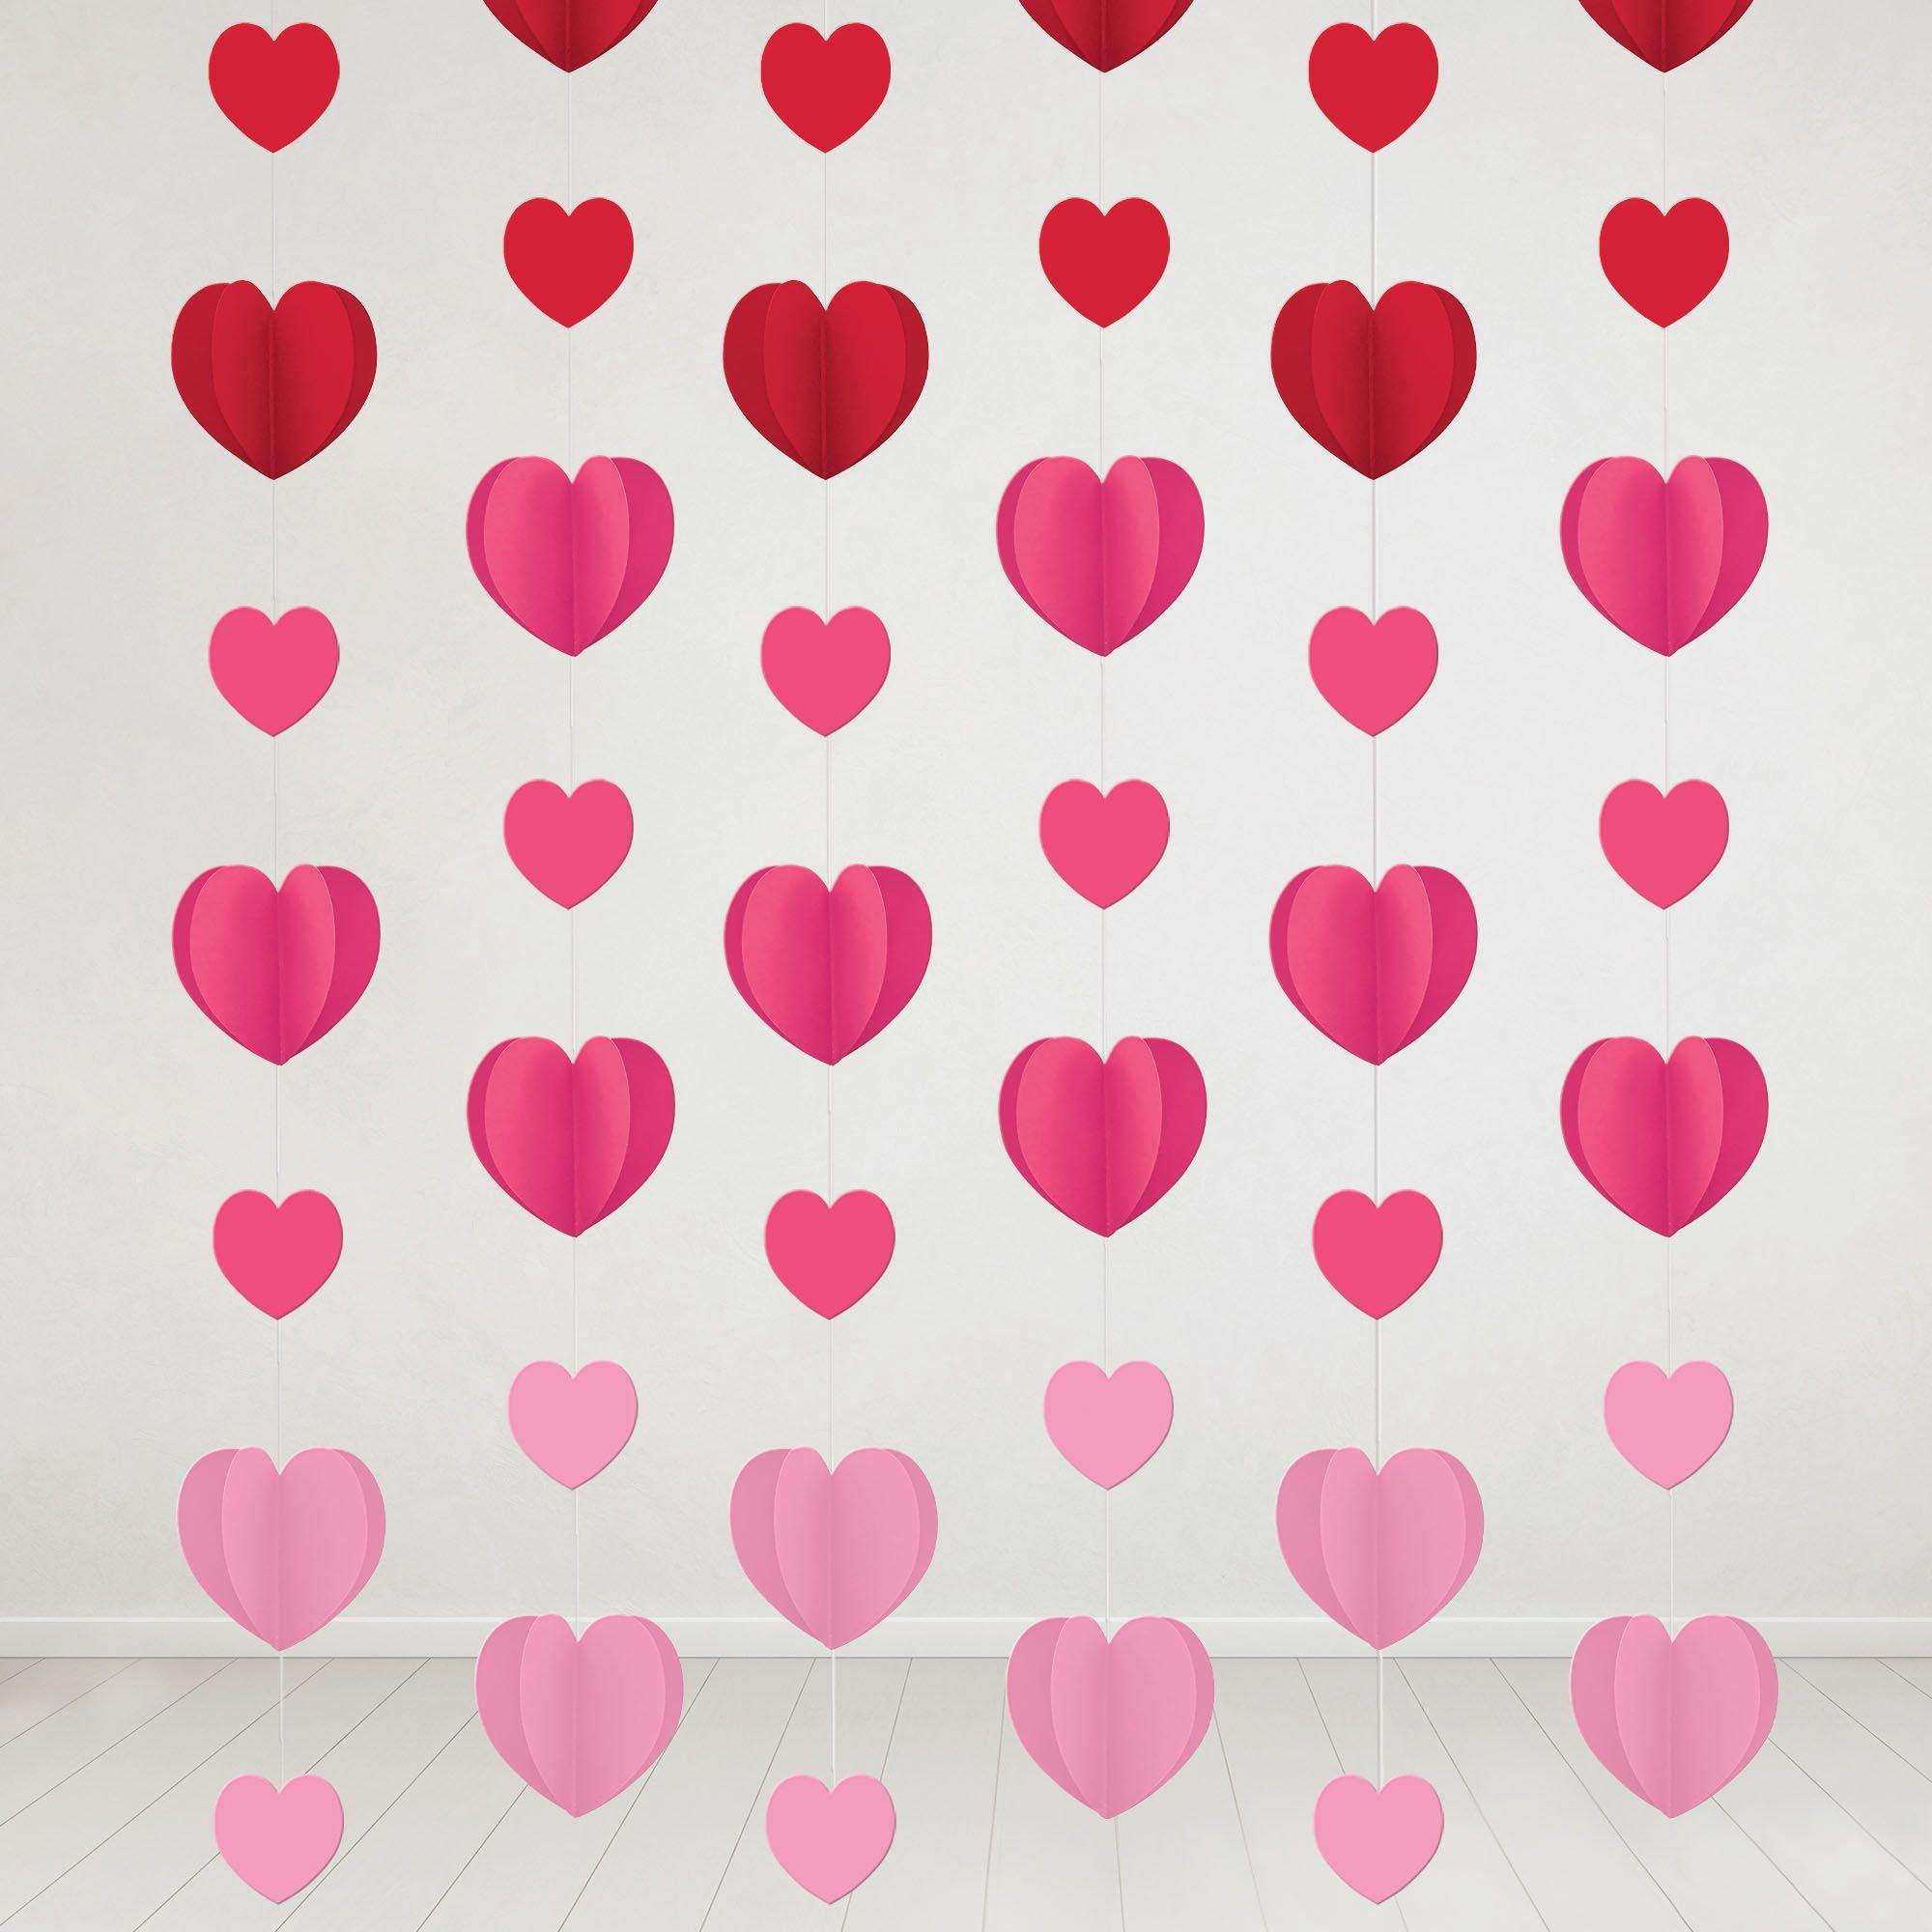 Pink, Red & Iridescent 3D Heart Foil & Plastic Hanging Decorations, 16ct